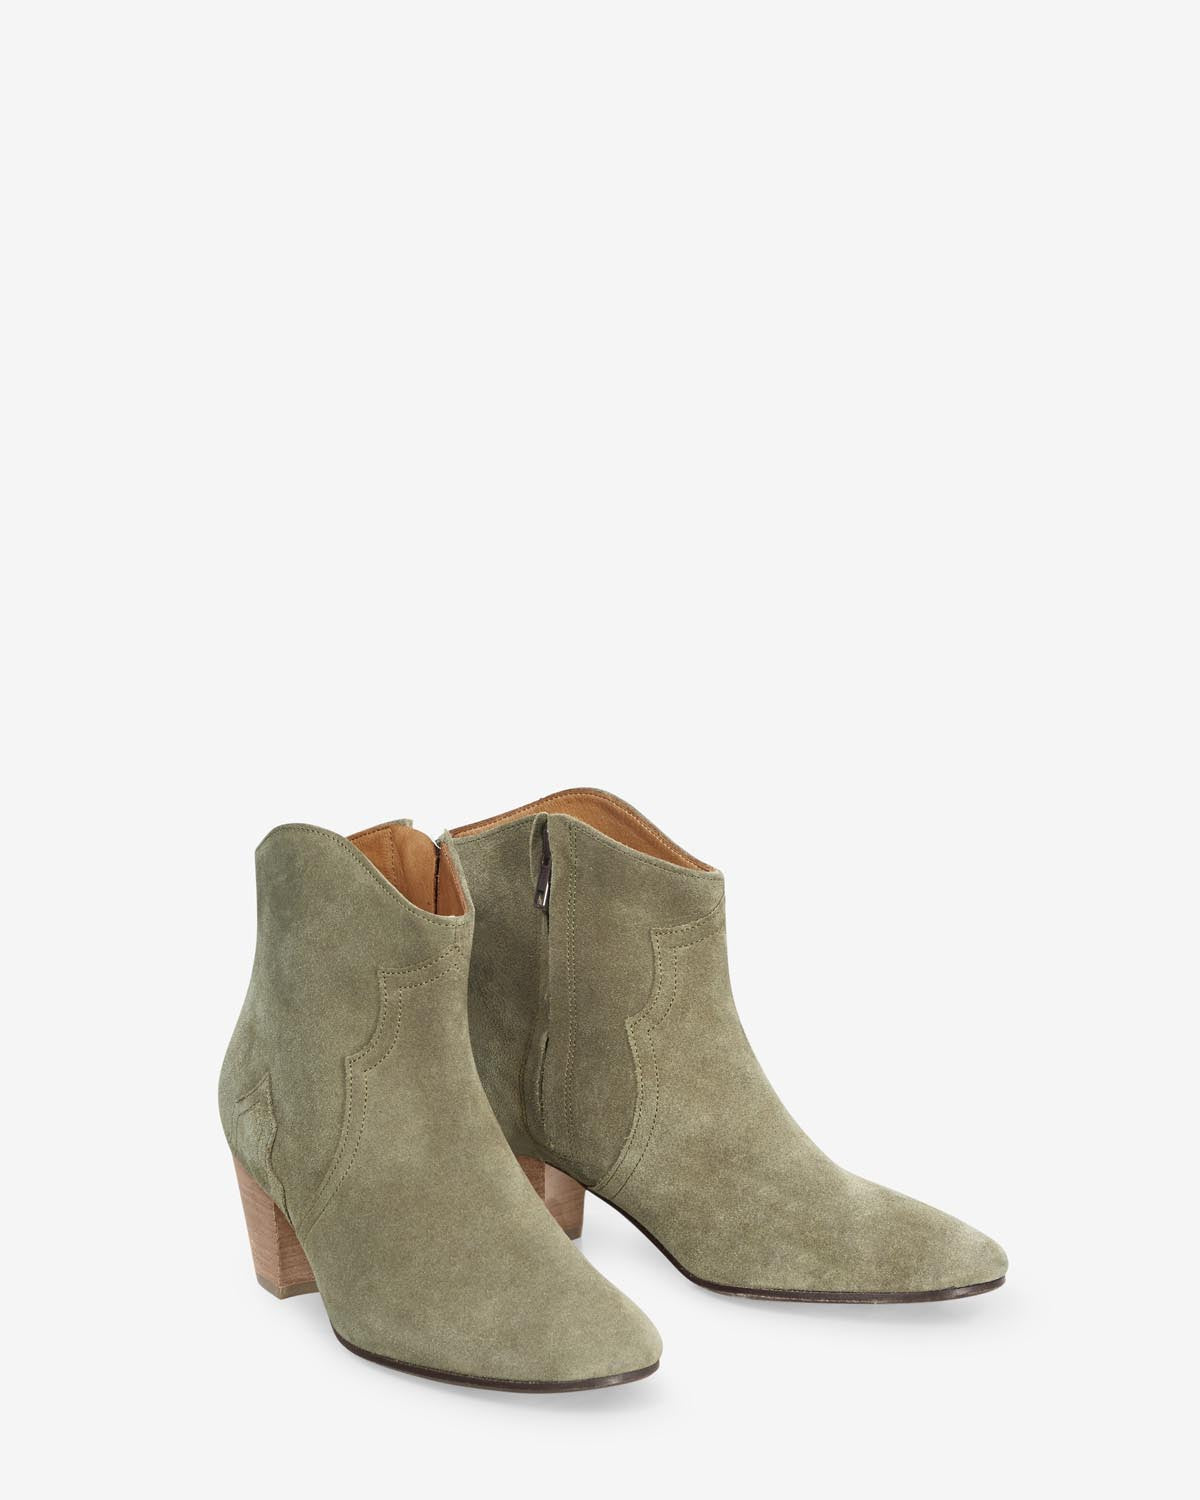 Boots dicker Woman Taupe 3